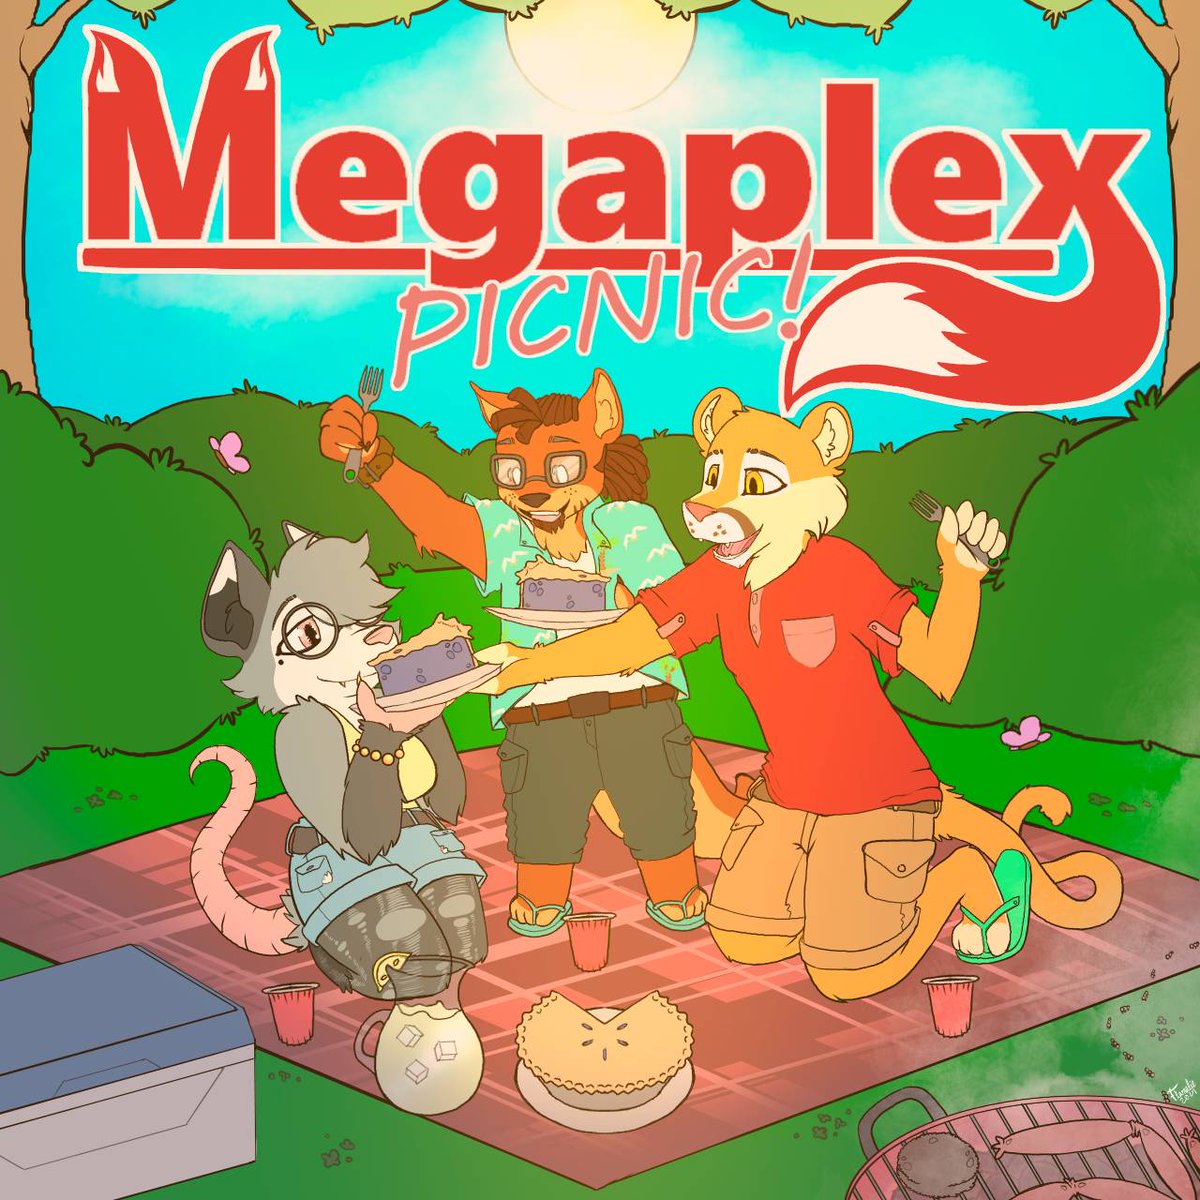 Adventurers! This is a reminder: the Megaplex Picnic at Bill Fredrick Park approaches on Saturday, May 25th, 2024. Secure your spot by May 17th to join the feast and revelry! docs.google.com/forms/d/e/1FAI…